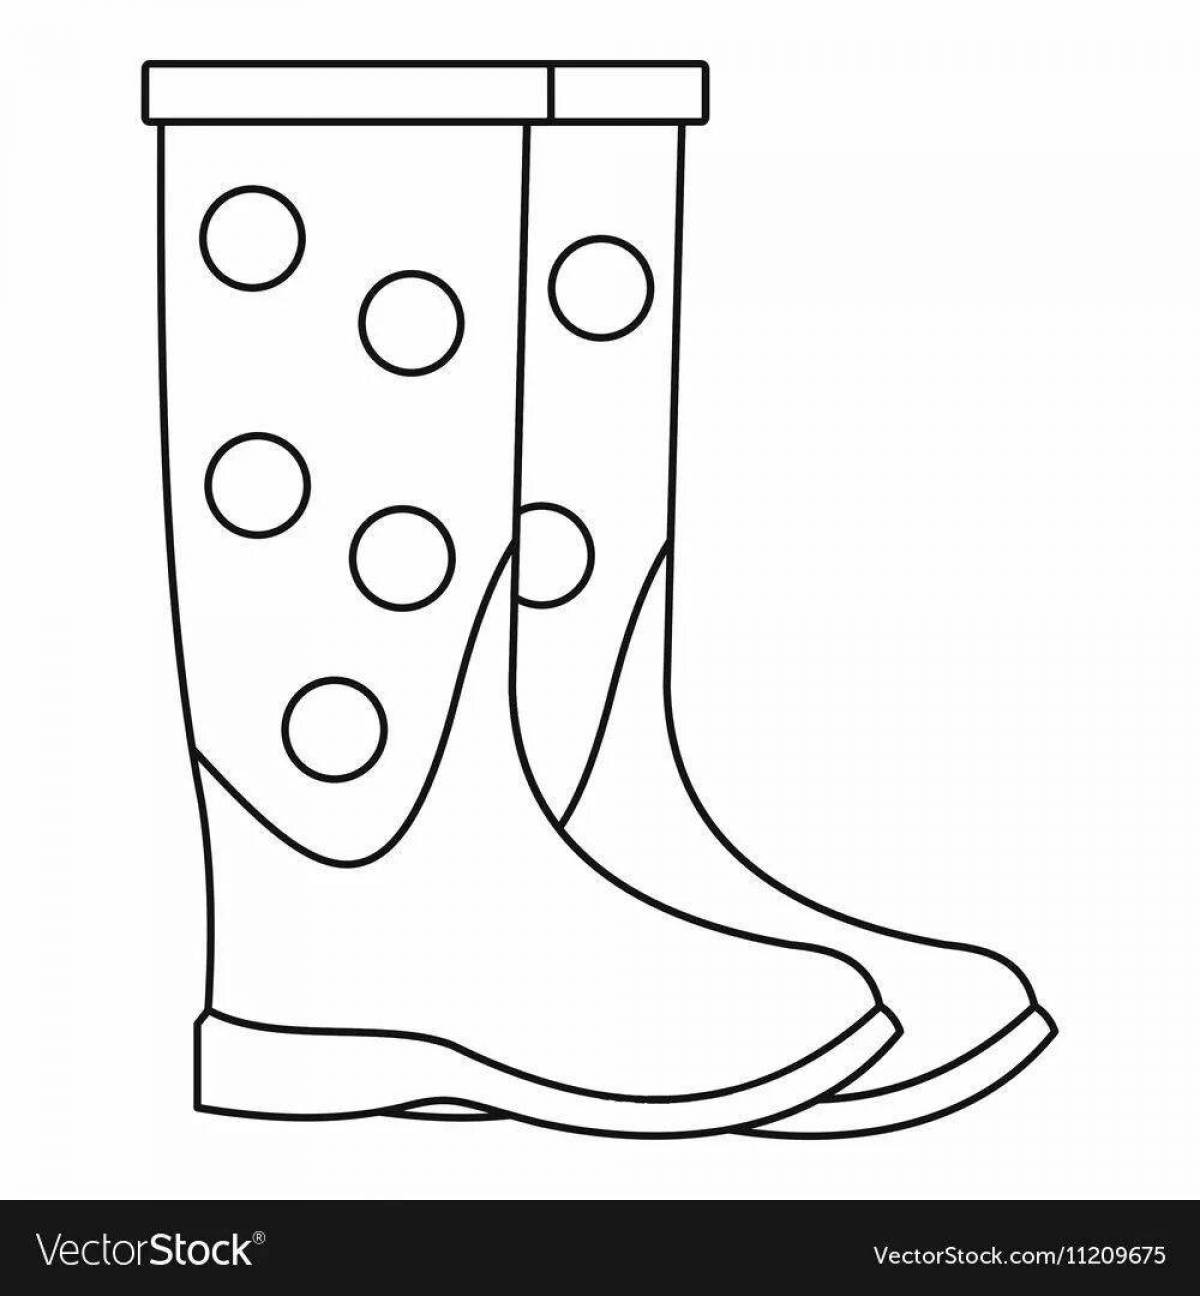 Adorable rubber boots coloring book